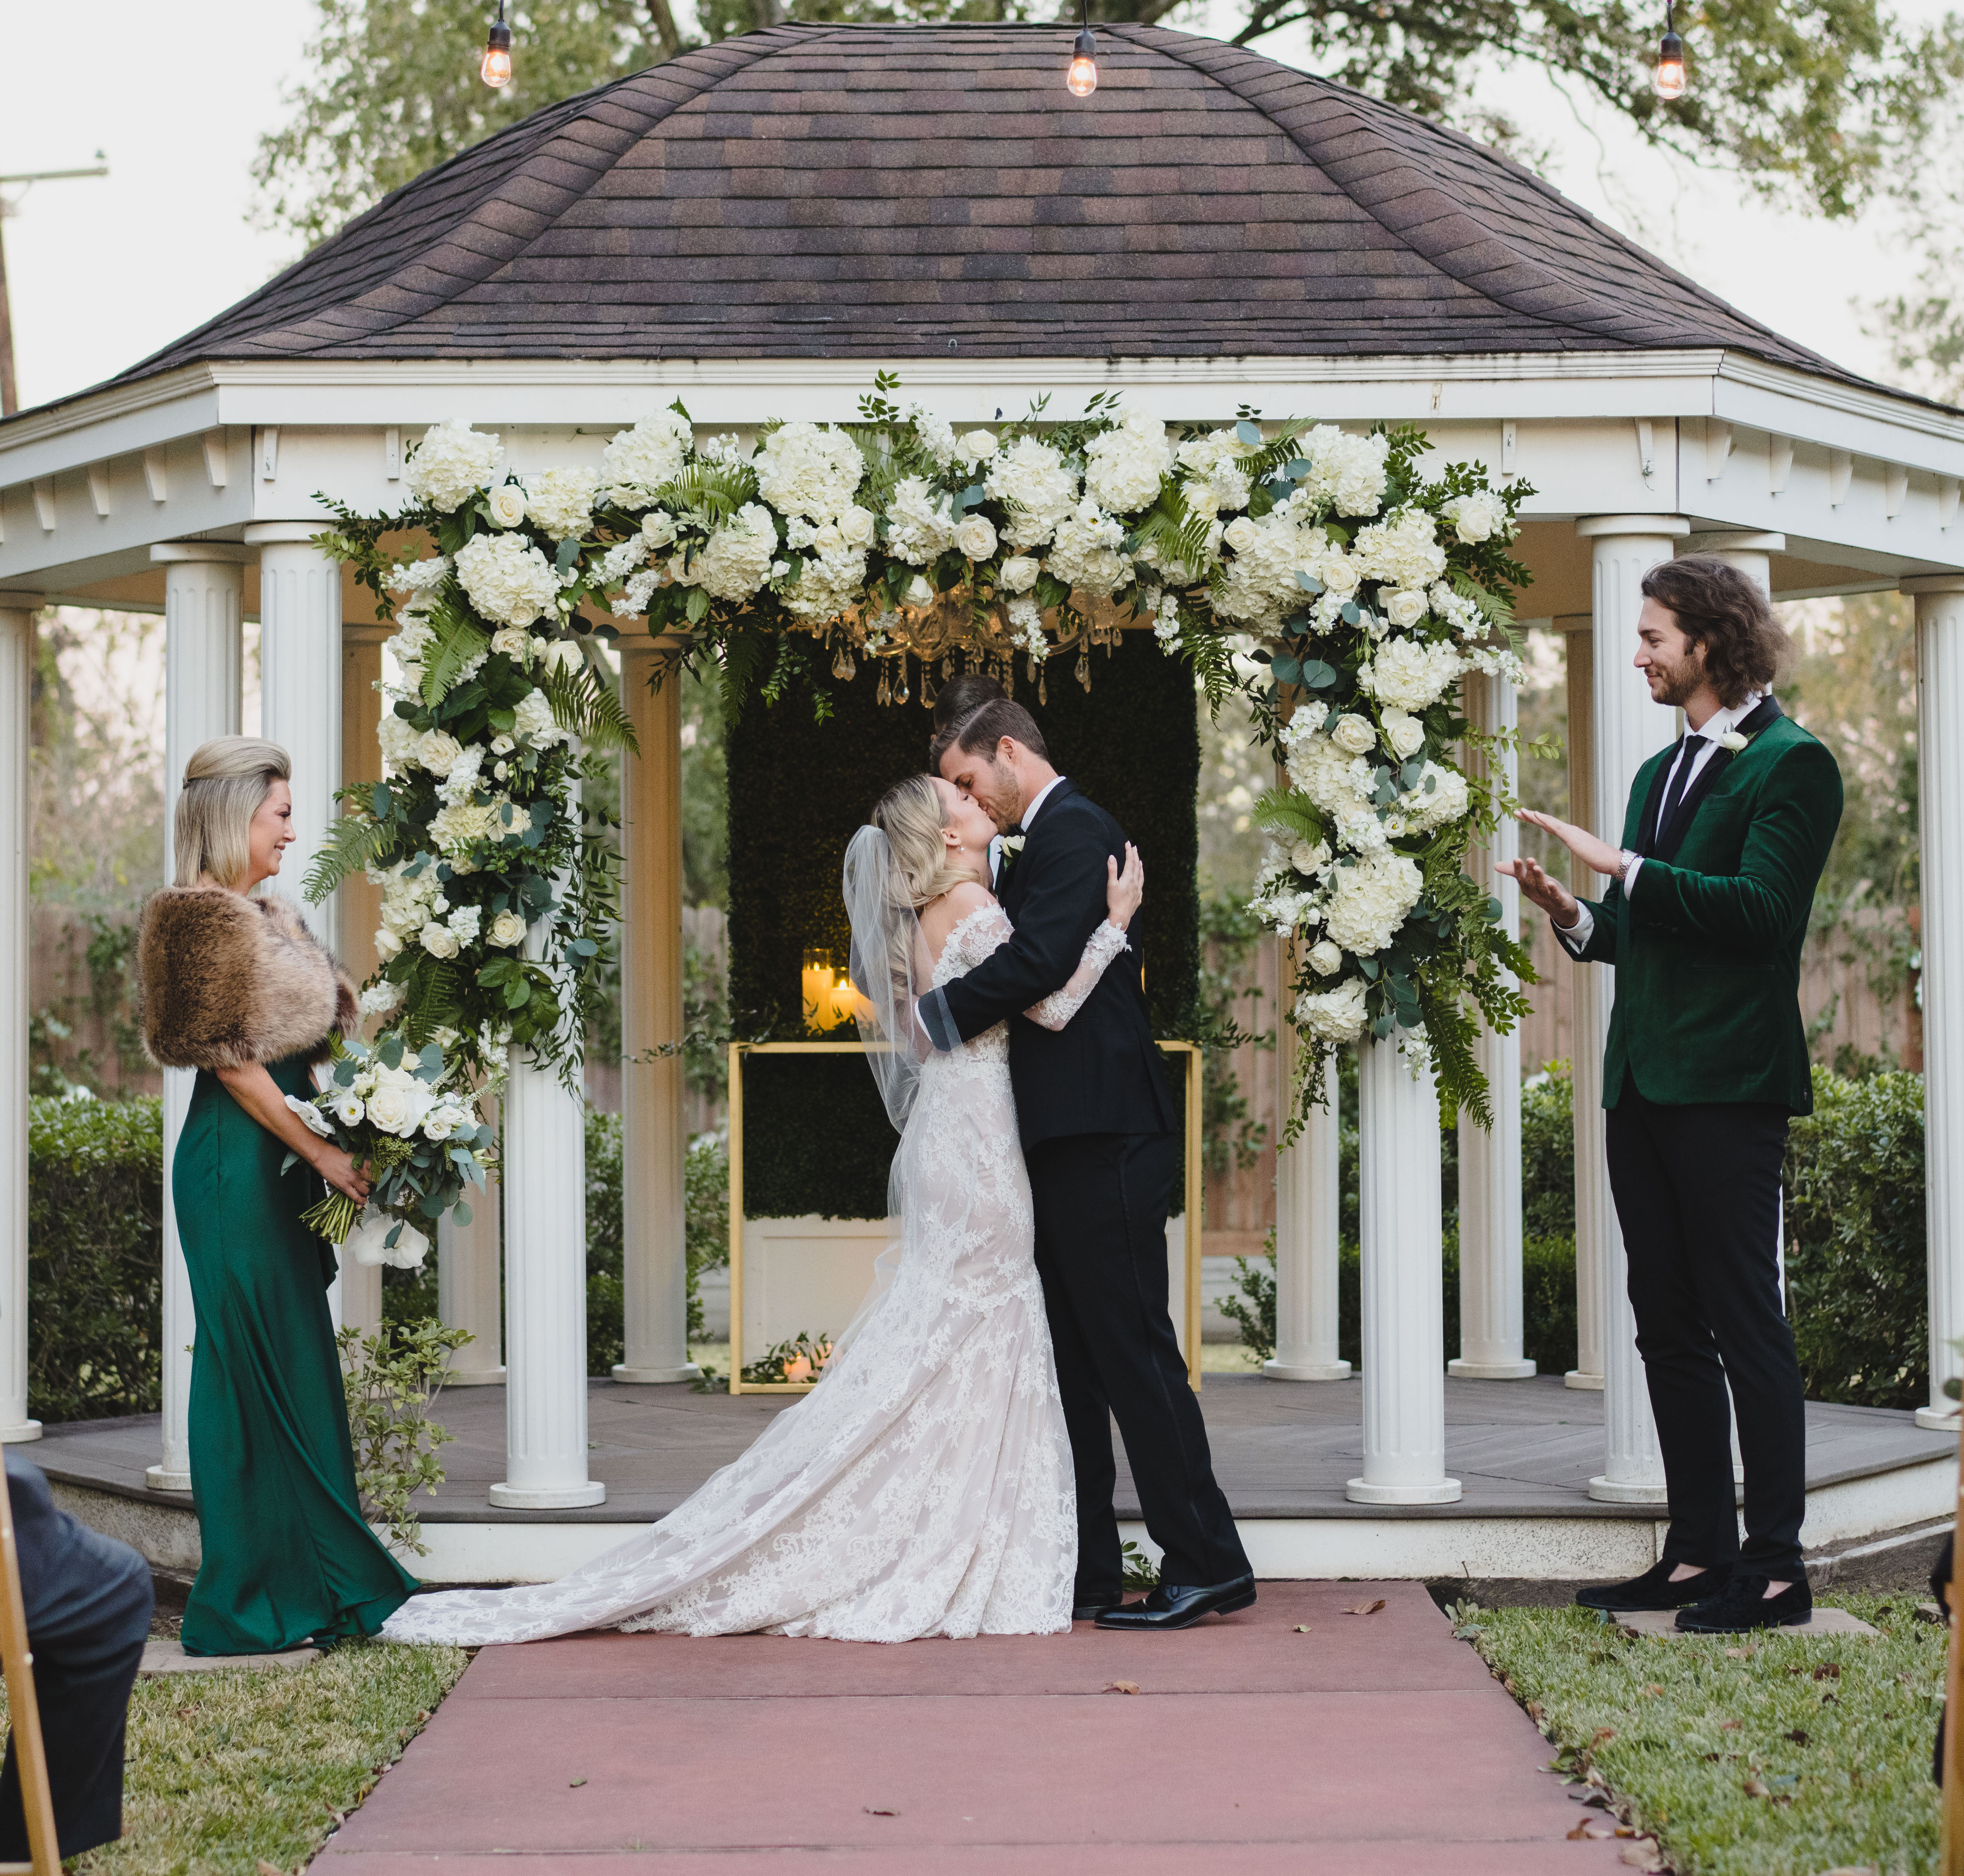 Jordan Kimball kisses his bride at their outdoor ceremony in Houston, TX at The Wynden.